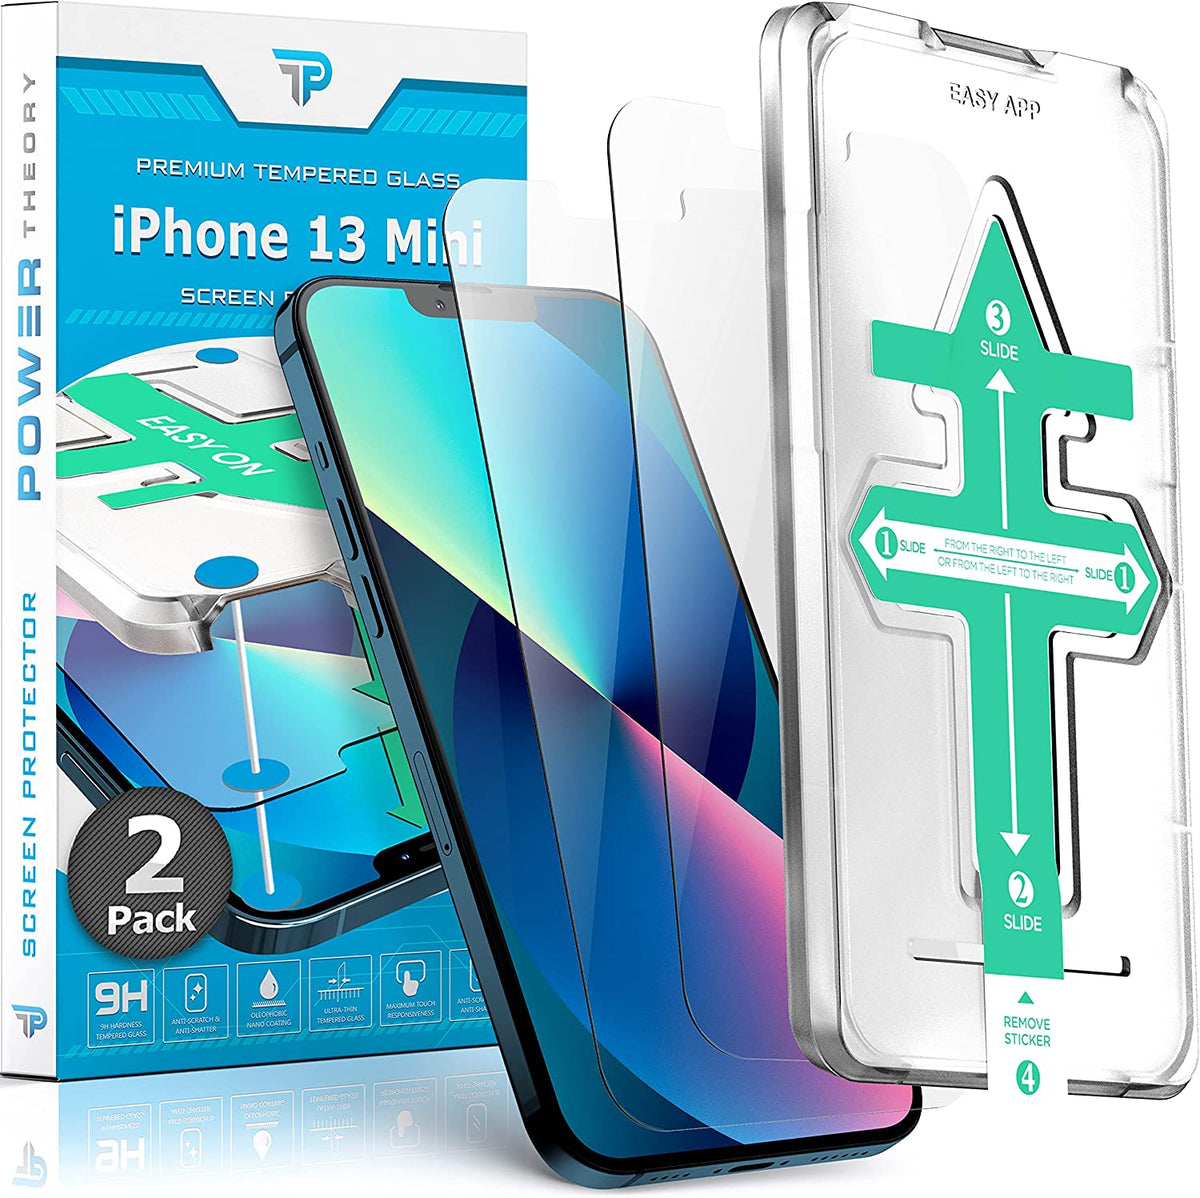 iPhone 13 Mini Tempered Glass Screen Protector [2-Pack] Cover